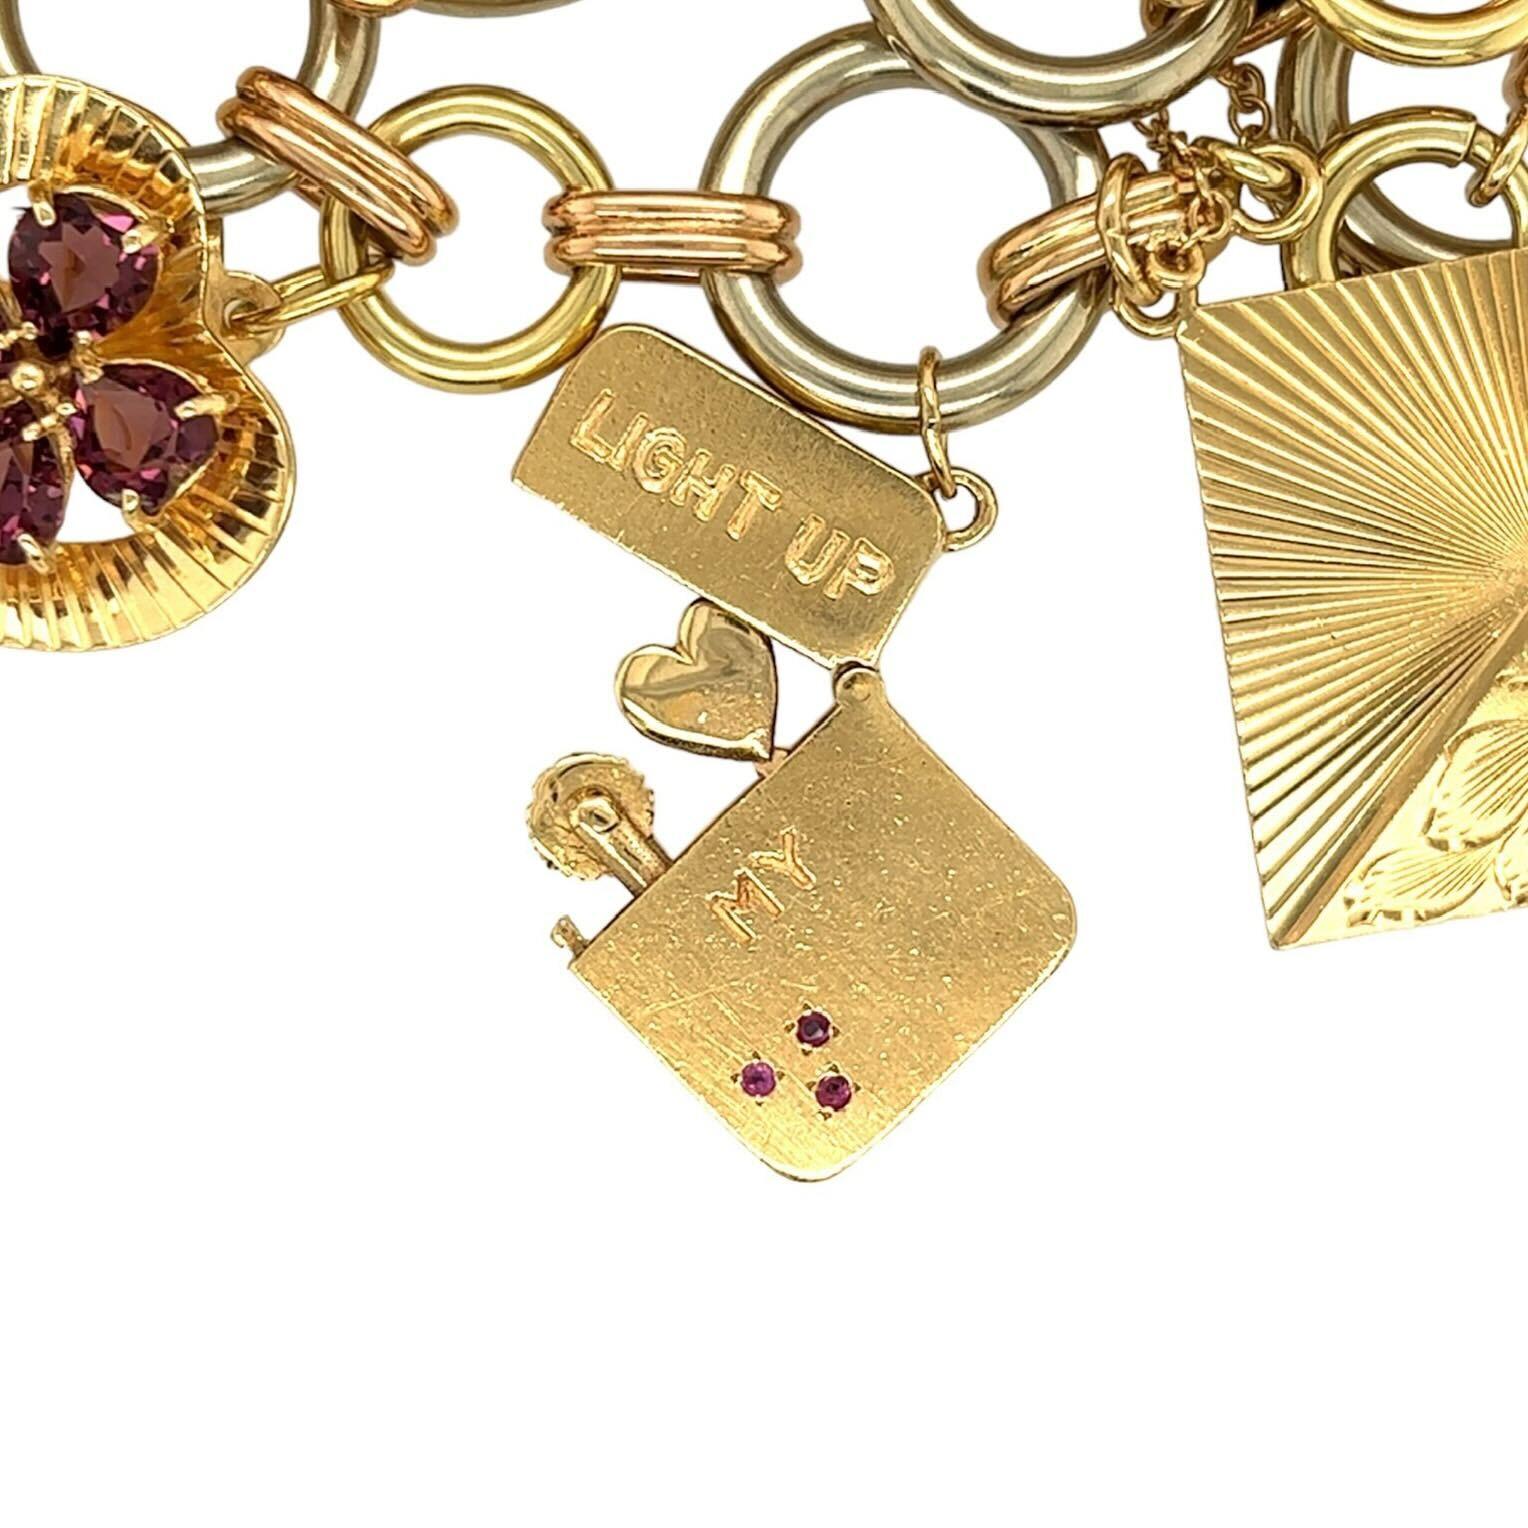 A 14 karat yellow, white and rose gold, pearl, ruby, sapphire, and amethyst bracelet.  The charm bracelet designed on a tri color gold ring and bar bracelet, suspending seven (7) charms consisting of:  a grand piano with a pierced case filled with